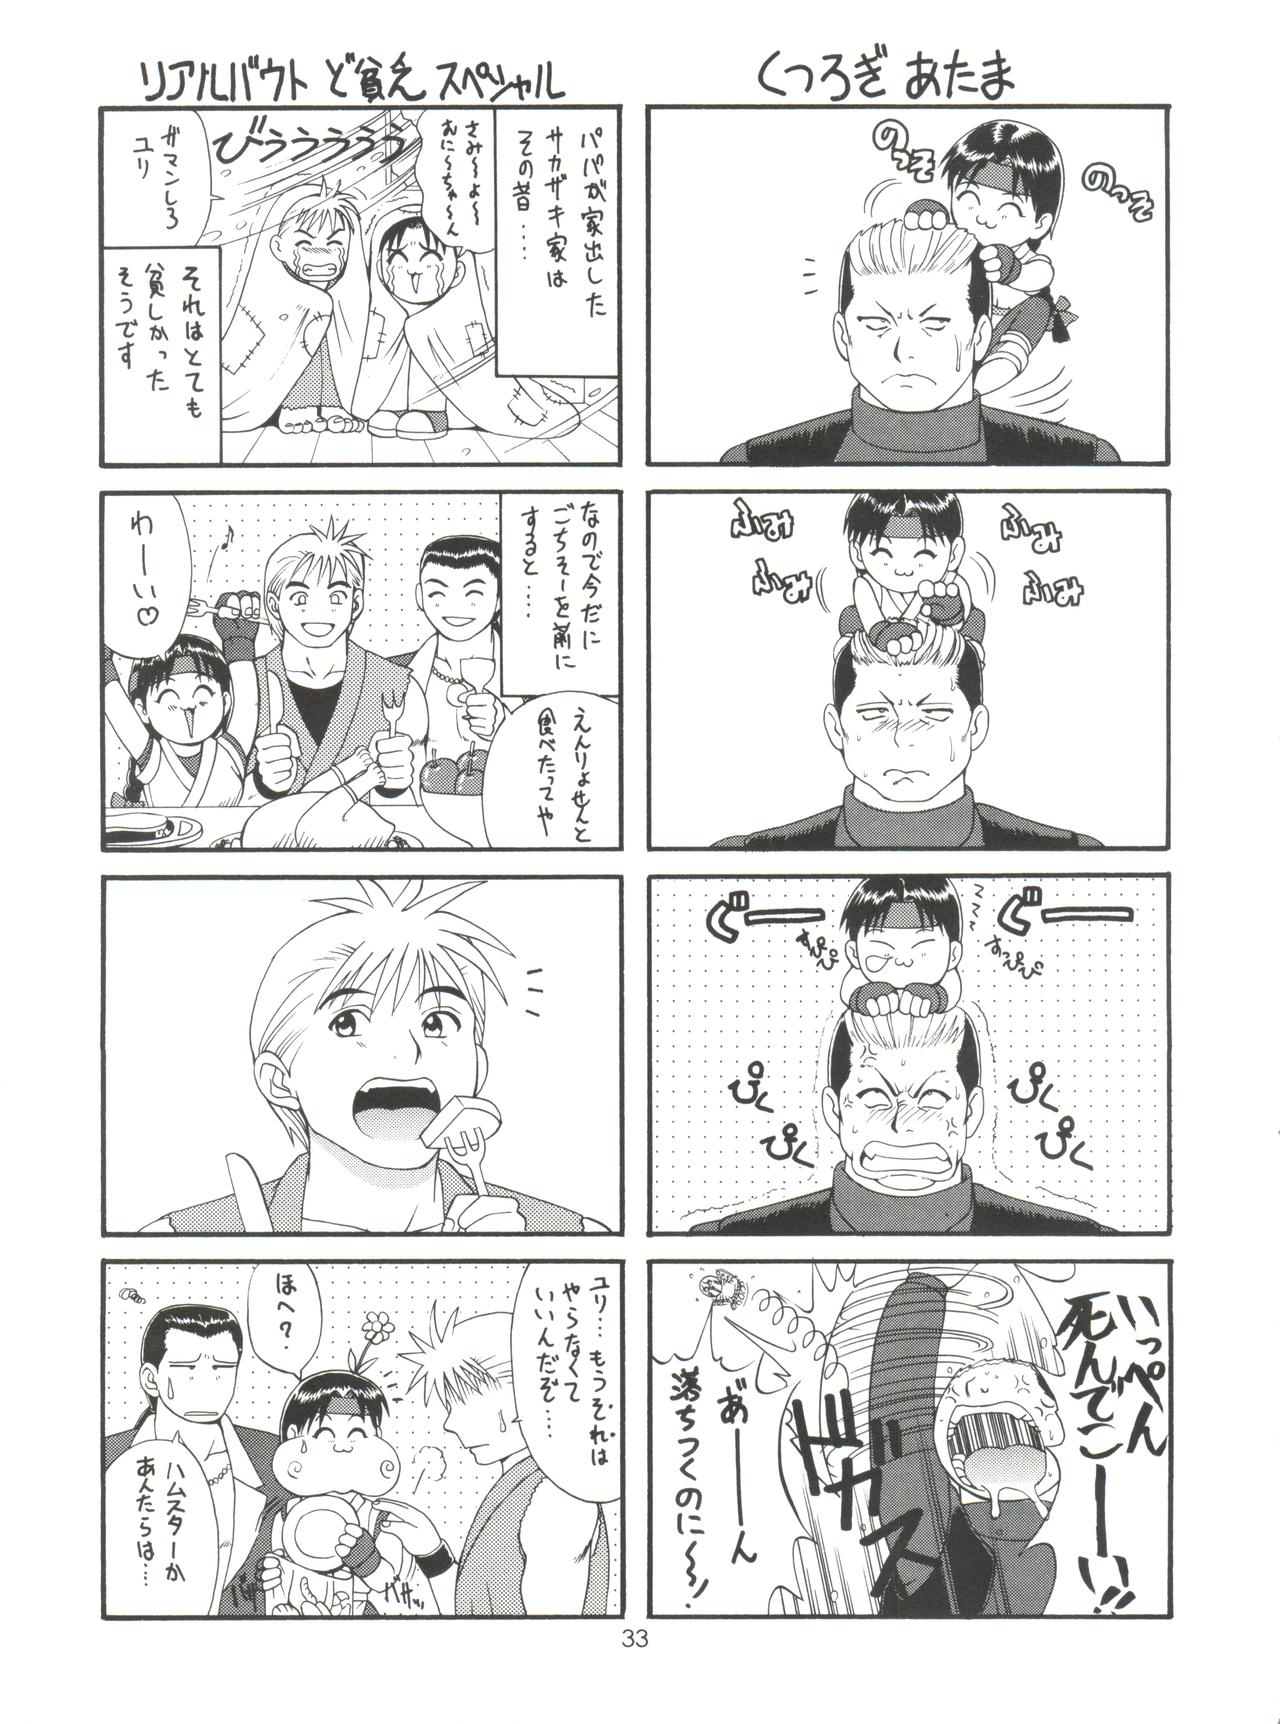 (CR24) [Saigado (Ishoku Dougen)] The Yuri & Friends '98 (King of Fighters) page 32 full